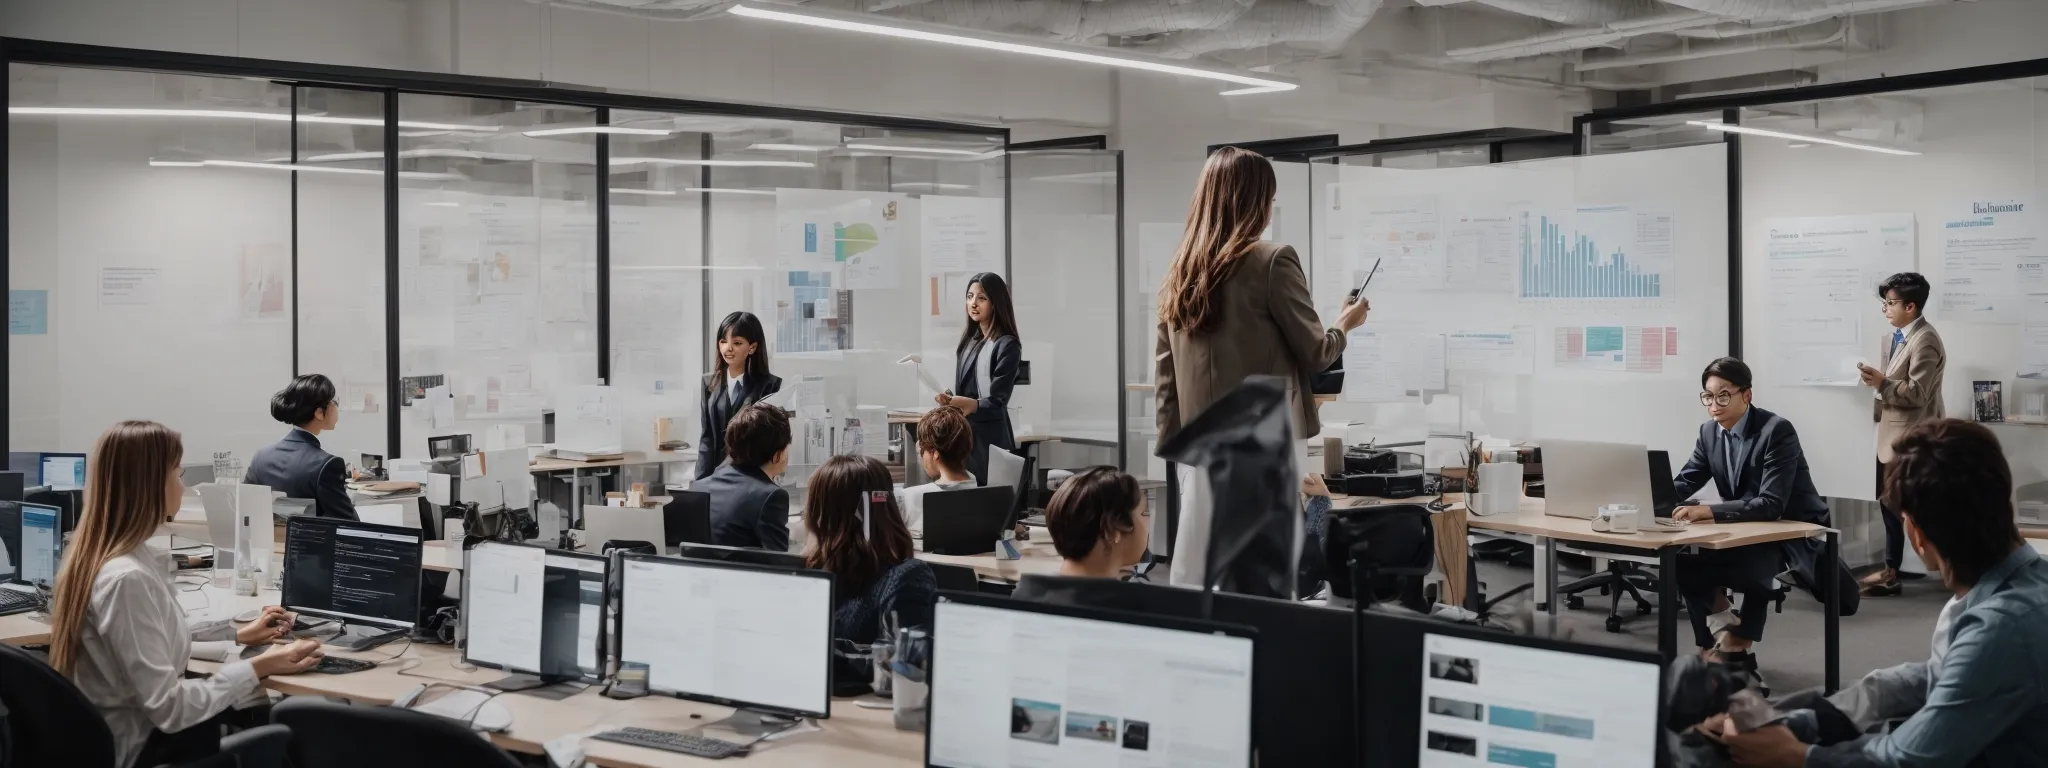 a bustling digital marketing office, with a team analyzing data and strategizing on a whiteboard, represents linkgraph's coordinated effort in sophisticated backlinking campaigns.